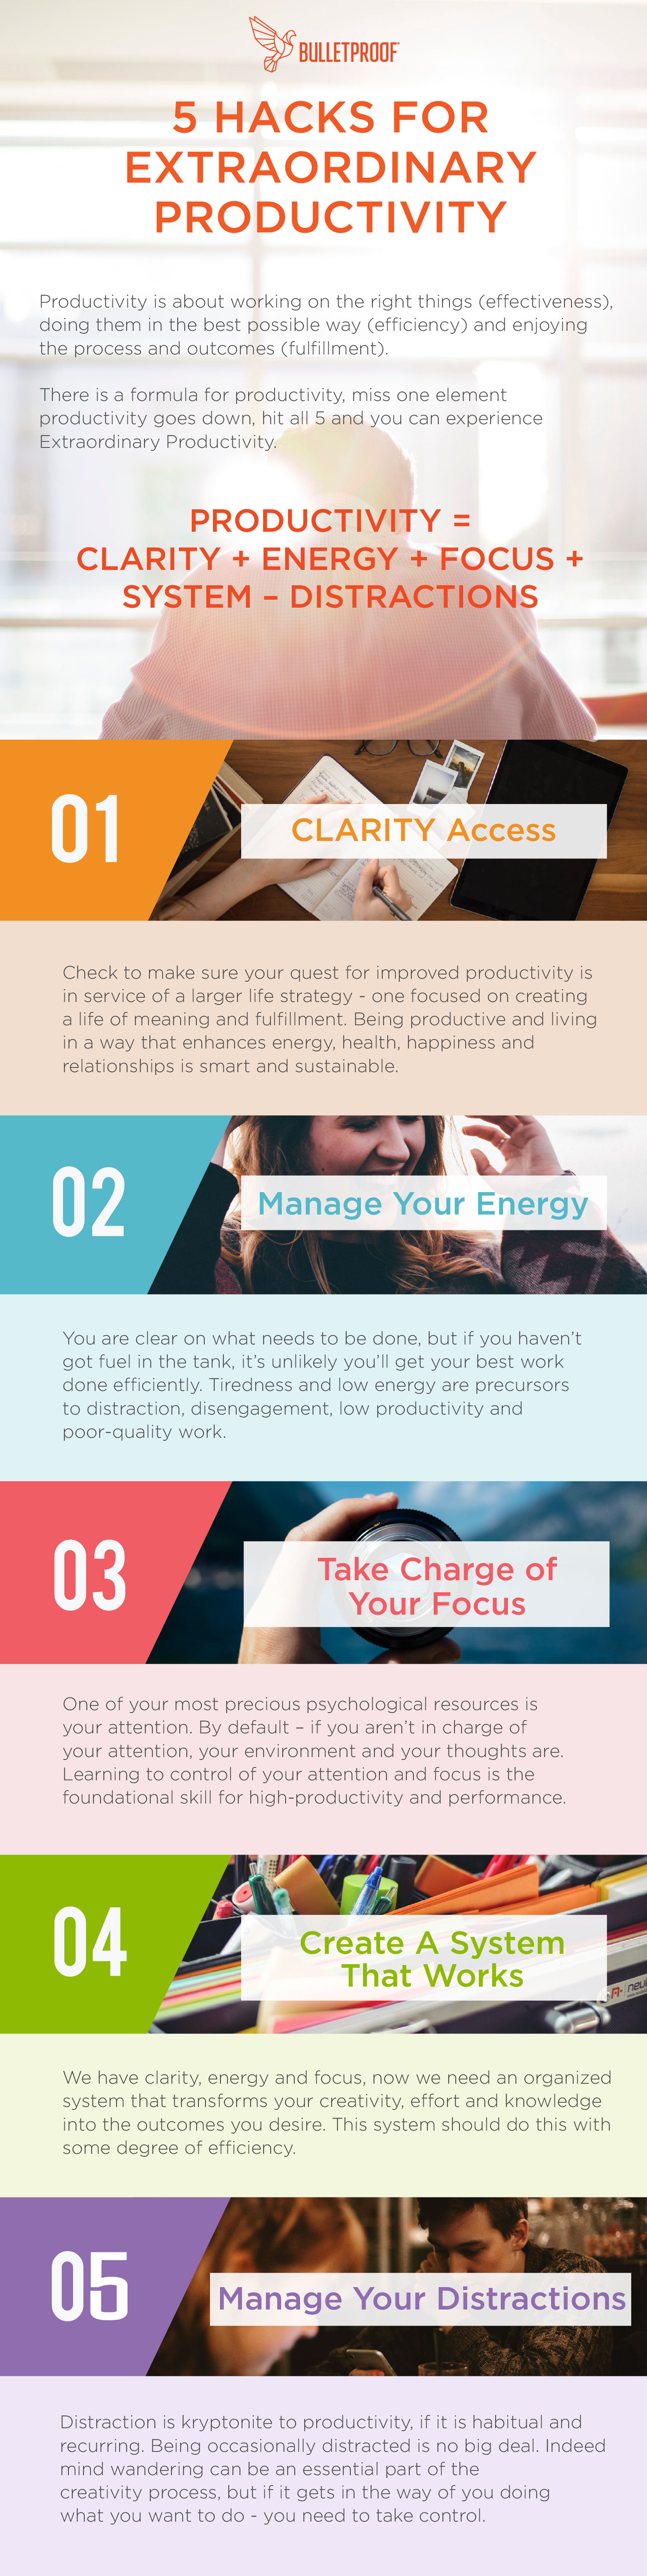 5 hacks for productivity infographic